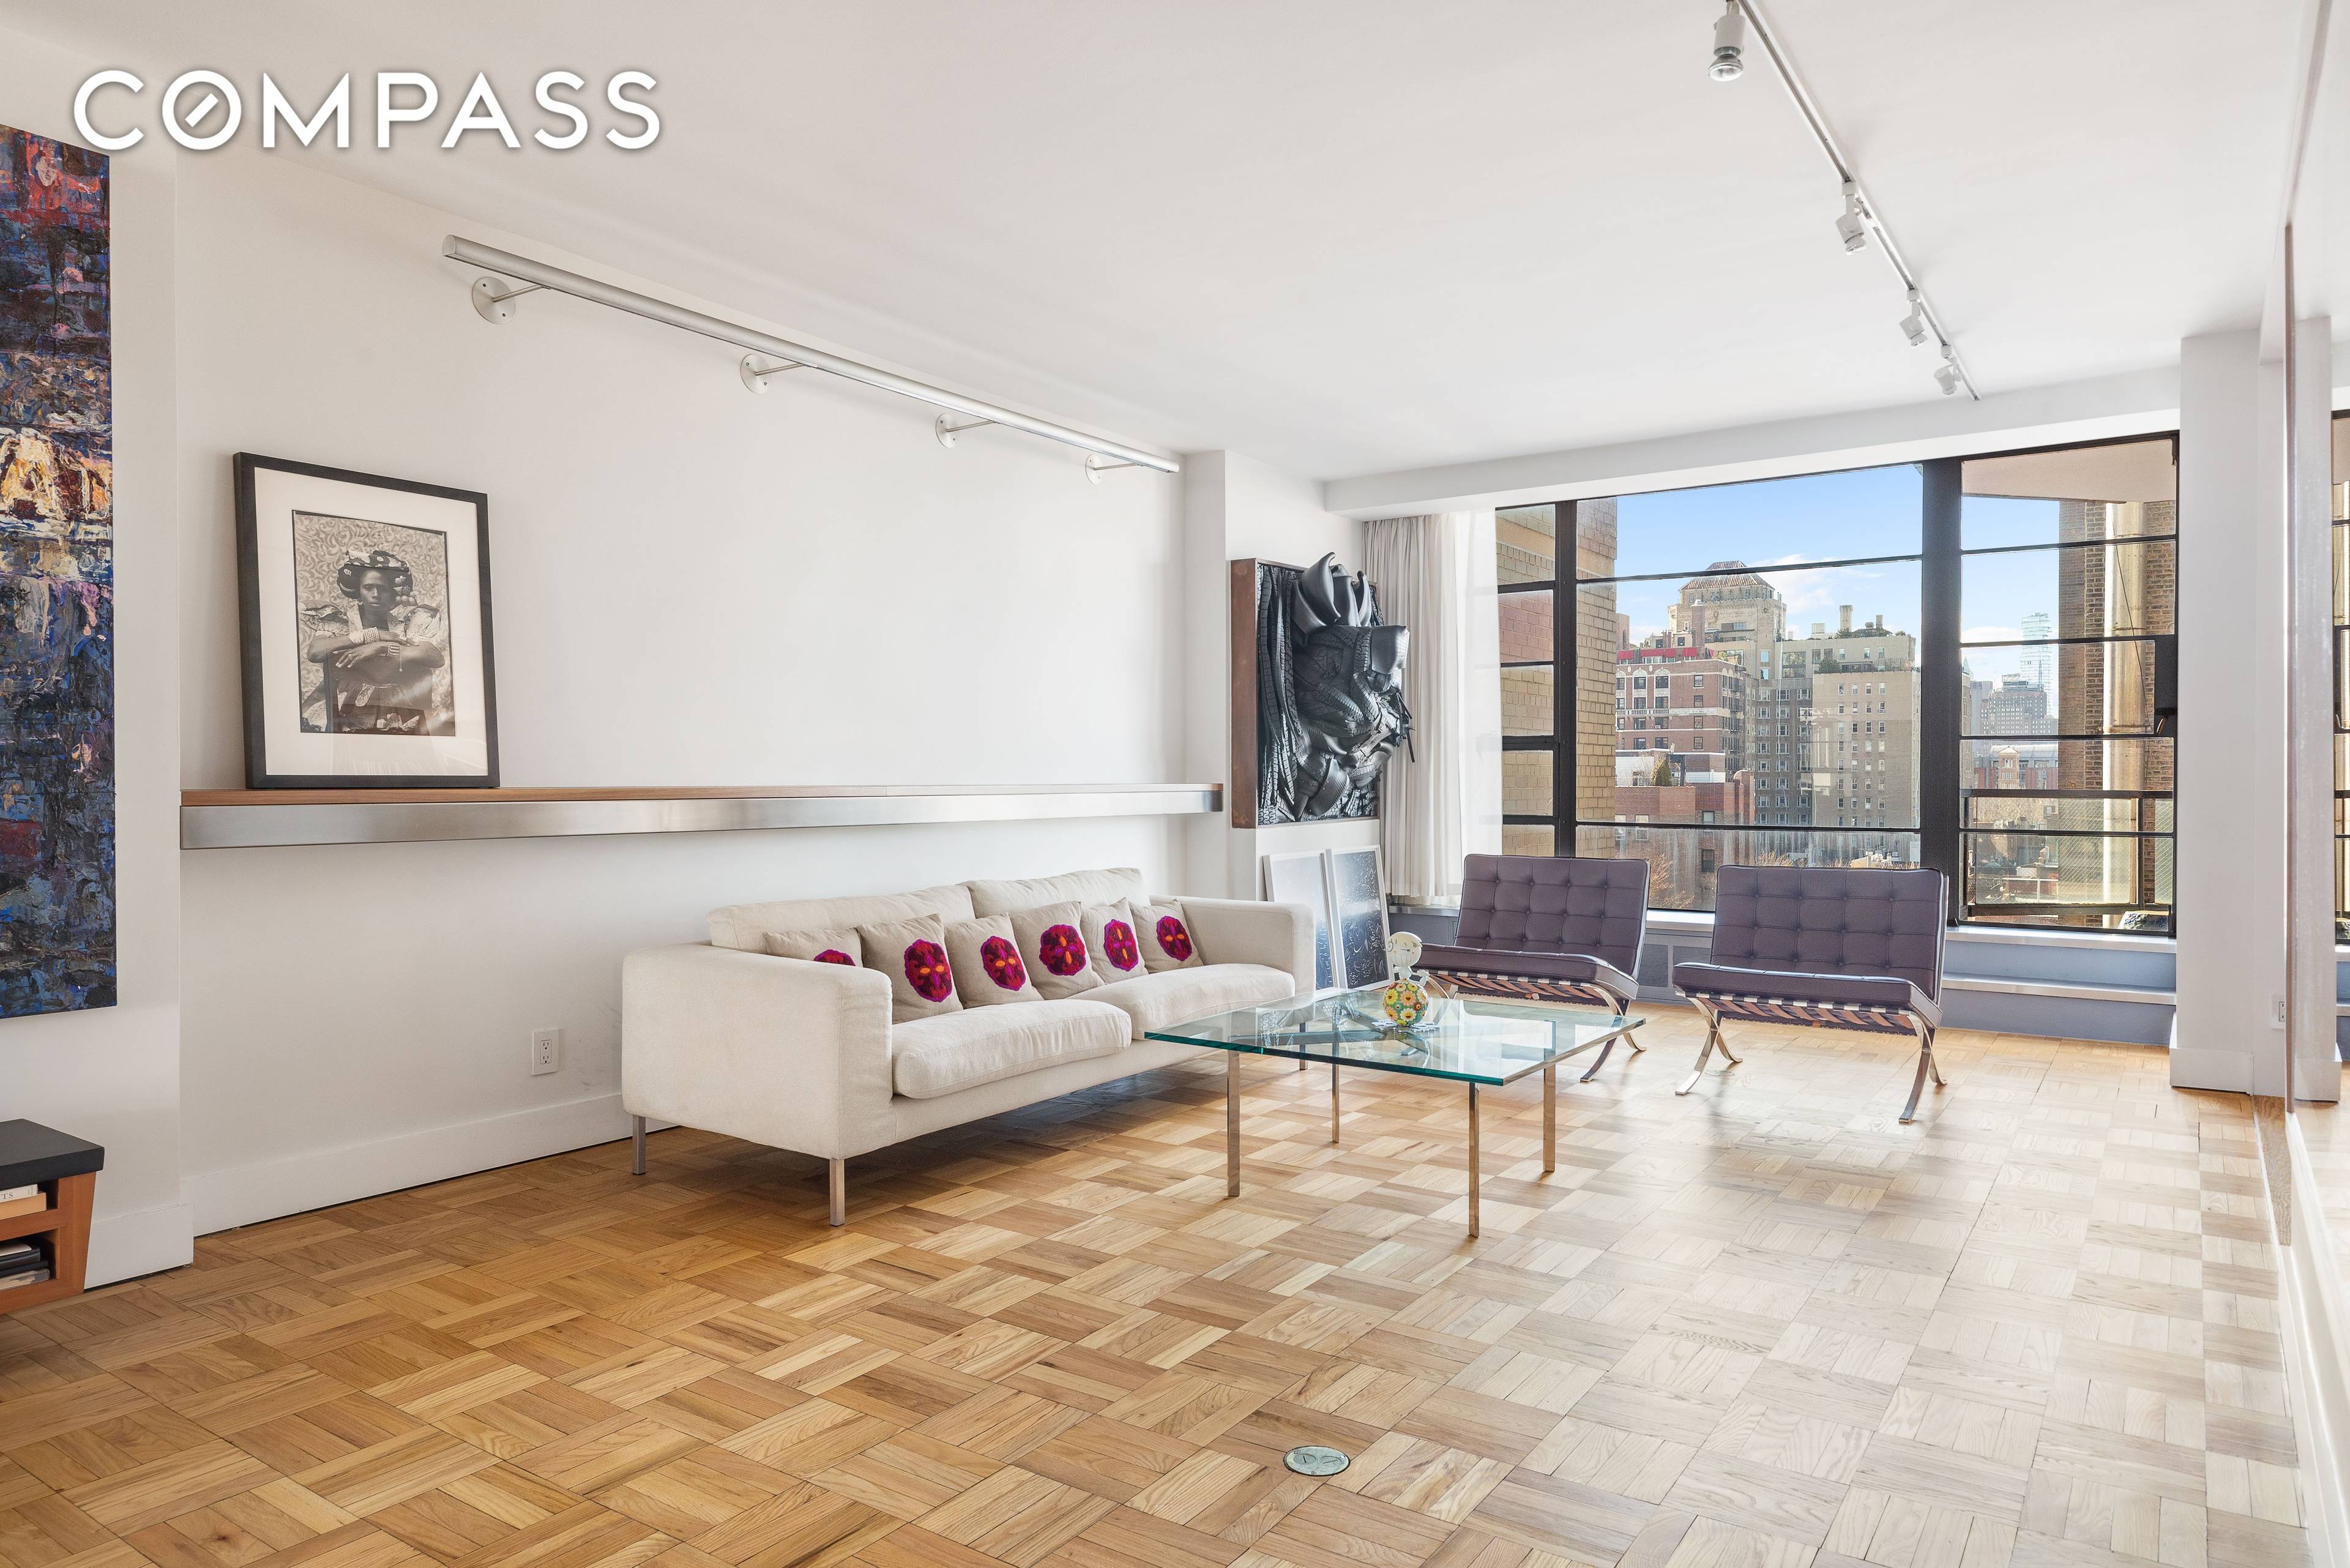 Butterfield House, at 37 West 12th St, is a luxury, full service, 24 hour doorman coop building located between Fifth and Sixth Avenue on one of the most sought after ...